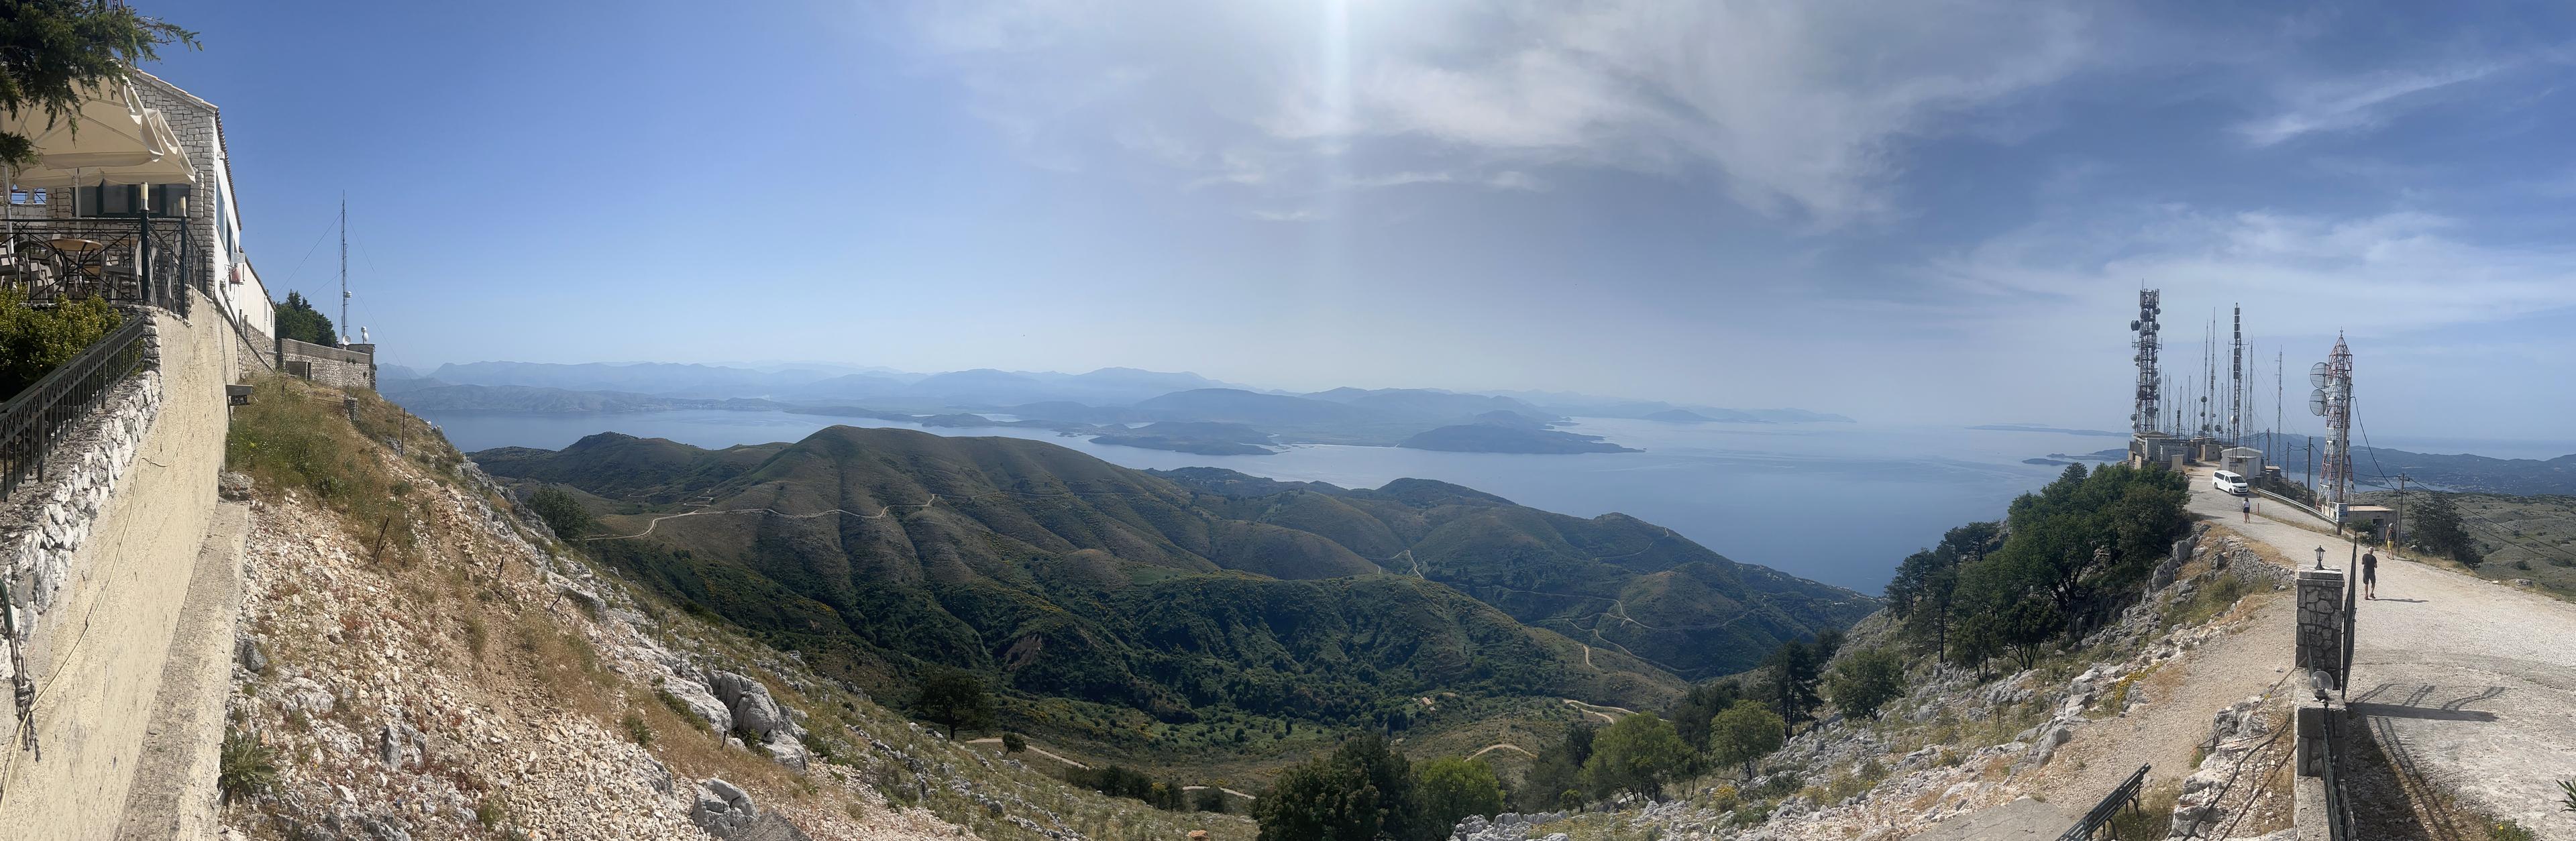 At the top of Corfu